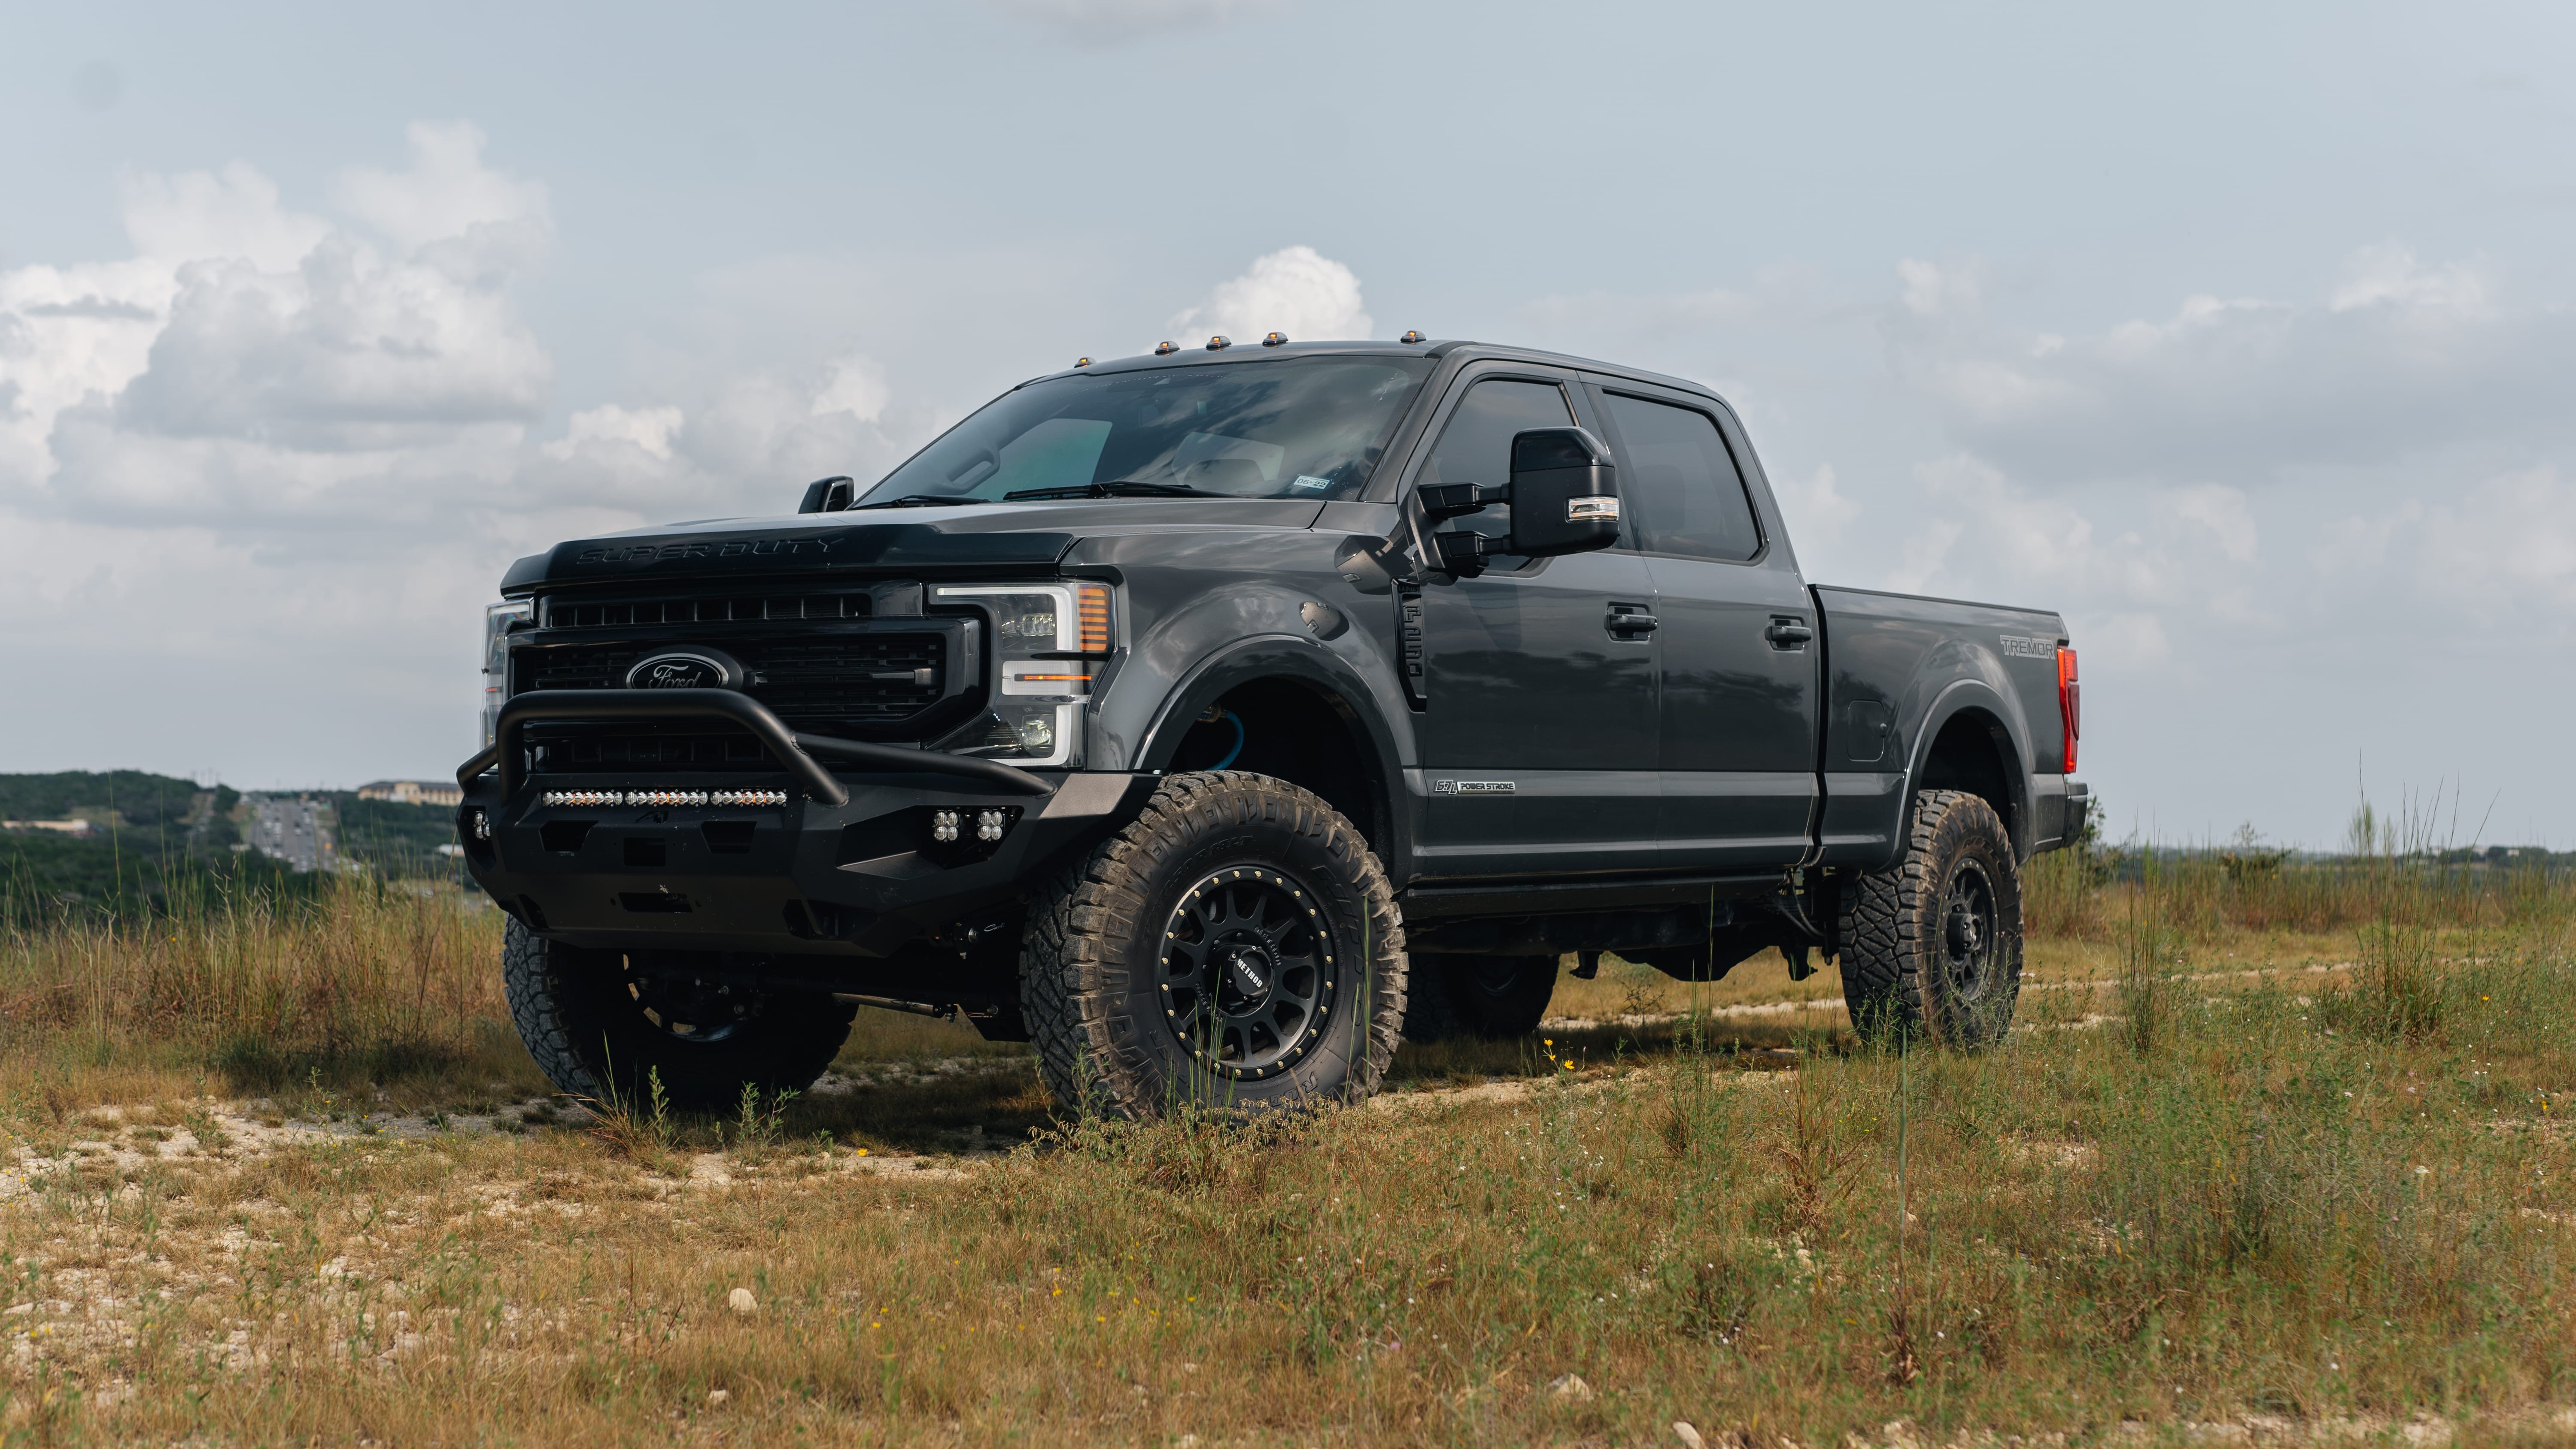 2021 Ford F-250 Super Duty Lariat in Lithium Grey with Carli 3.5" Pintop Suspension Kit, 18" Method 305HD Wheels, 37x12.50R18 Nitto Ridge Grappler Tires, BedSlide Retractable Bed, Fab Fours Front Bumper, Baja Squadron Fog Lights, Baja Design 30" Light Bar